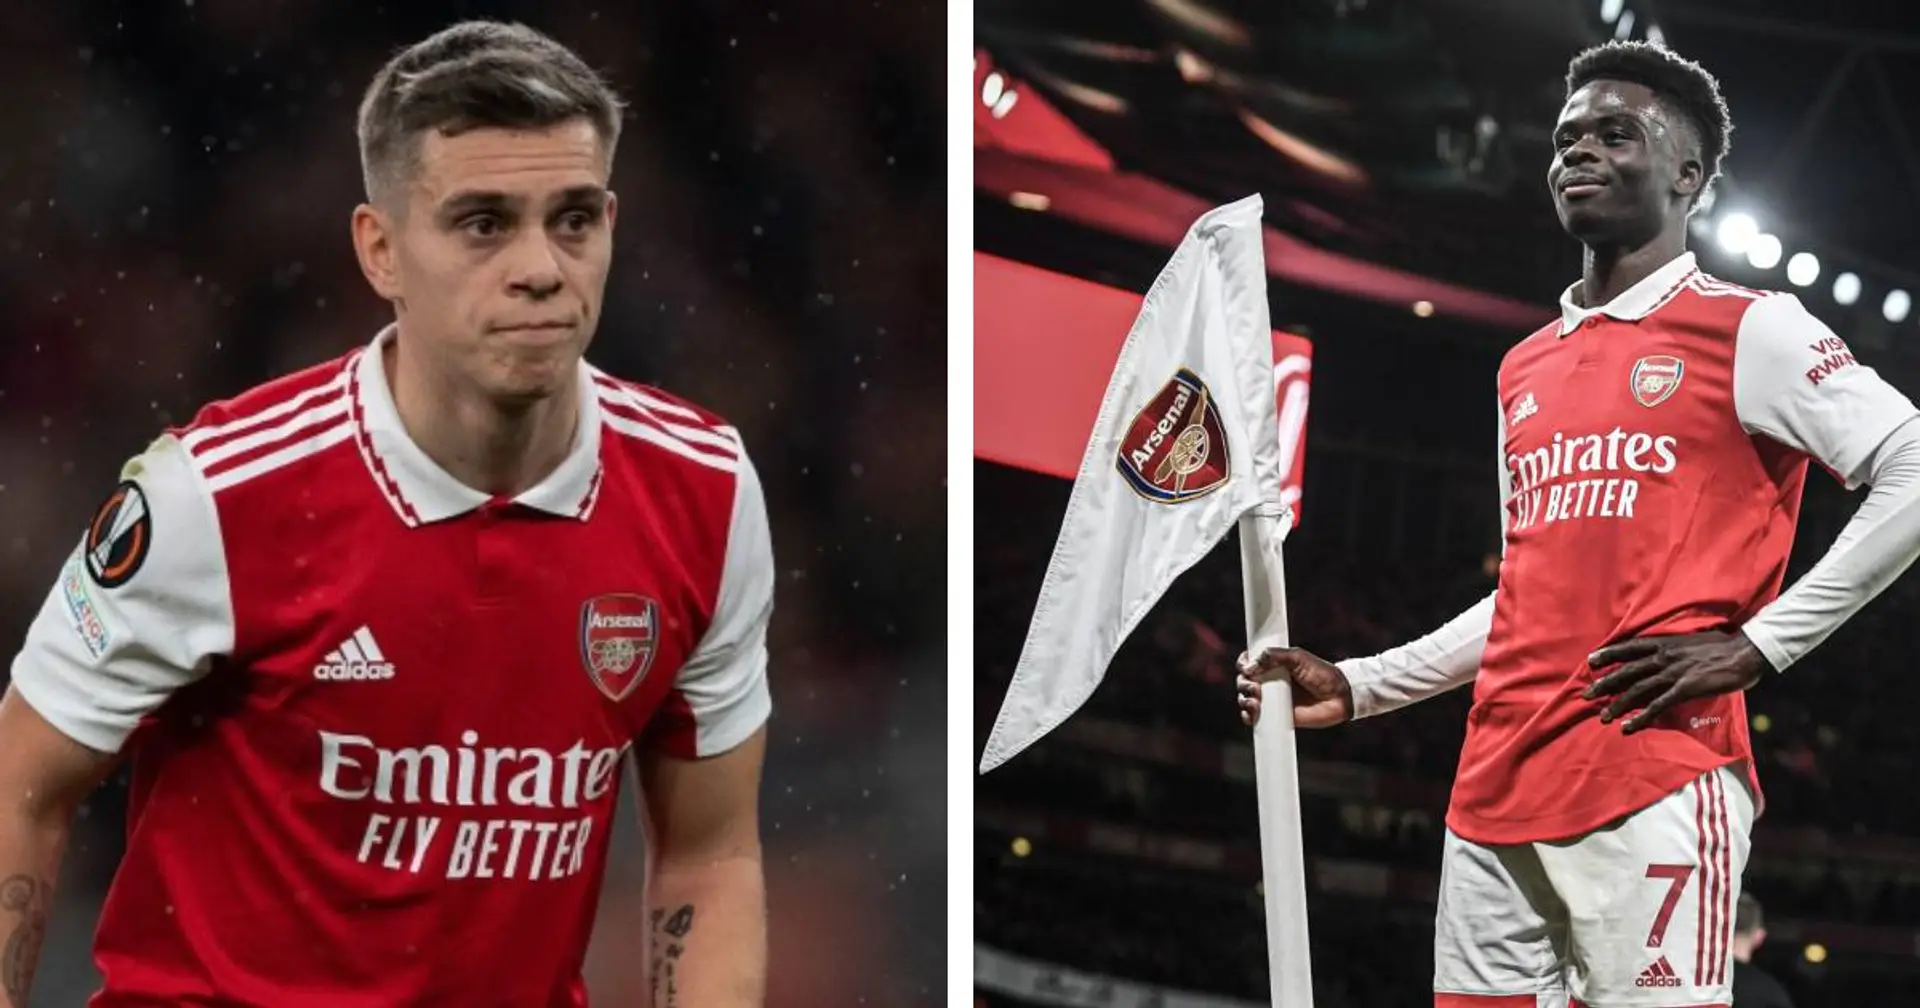 Leandro Trossard second only to Bukayo Saka in key attacking stat for Arsenal